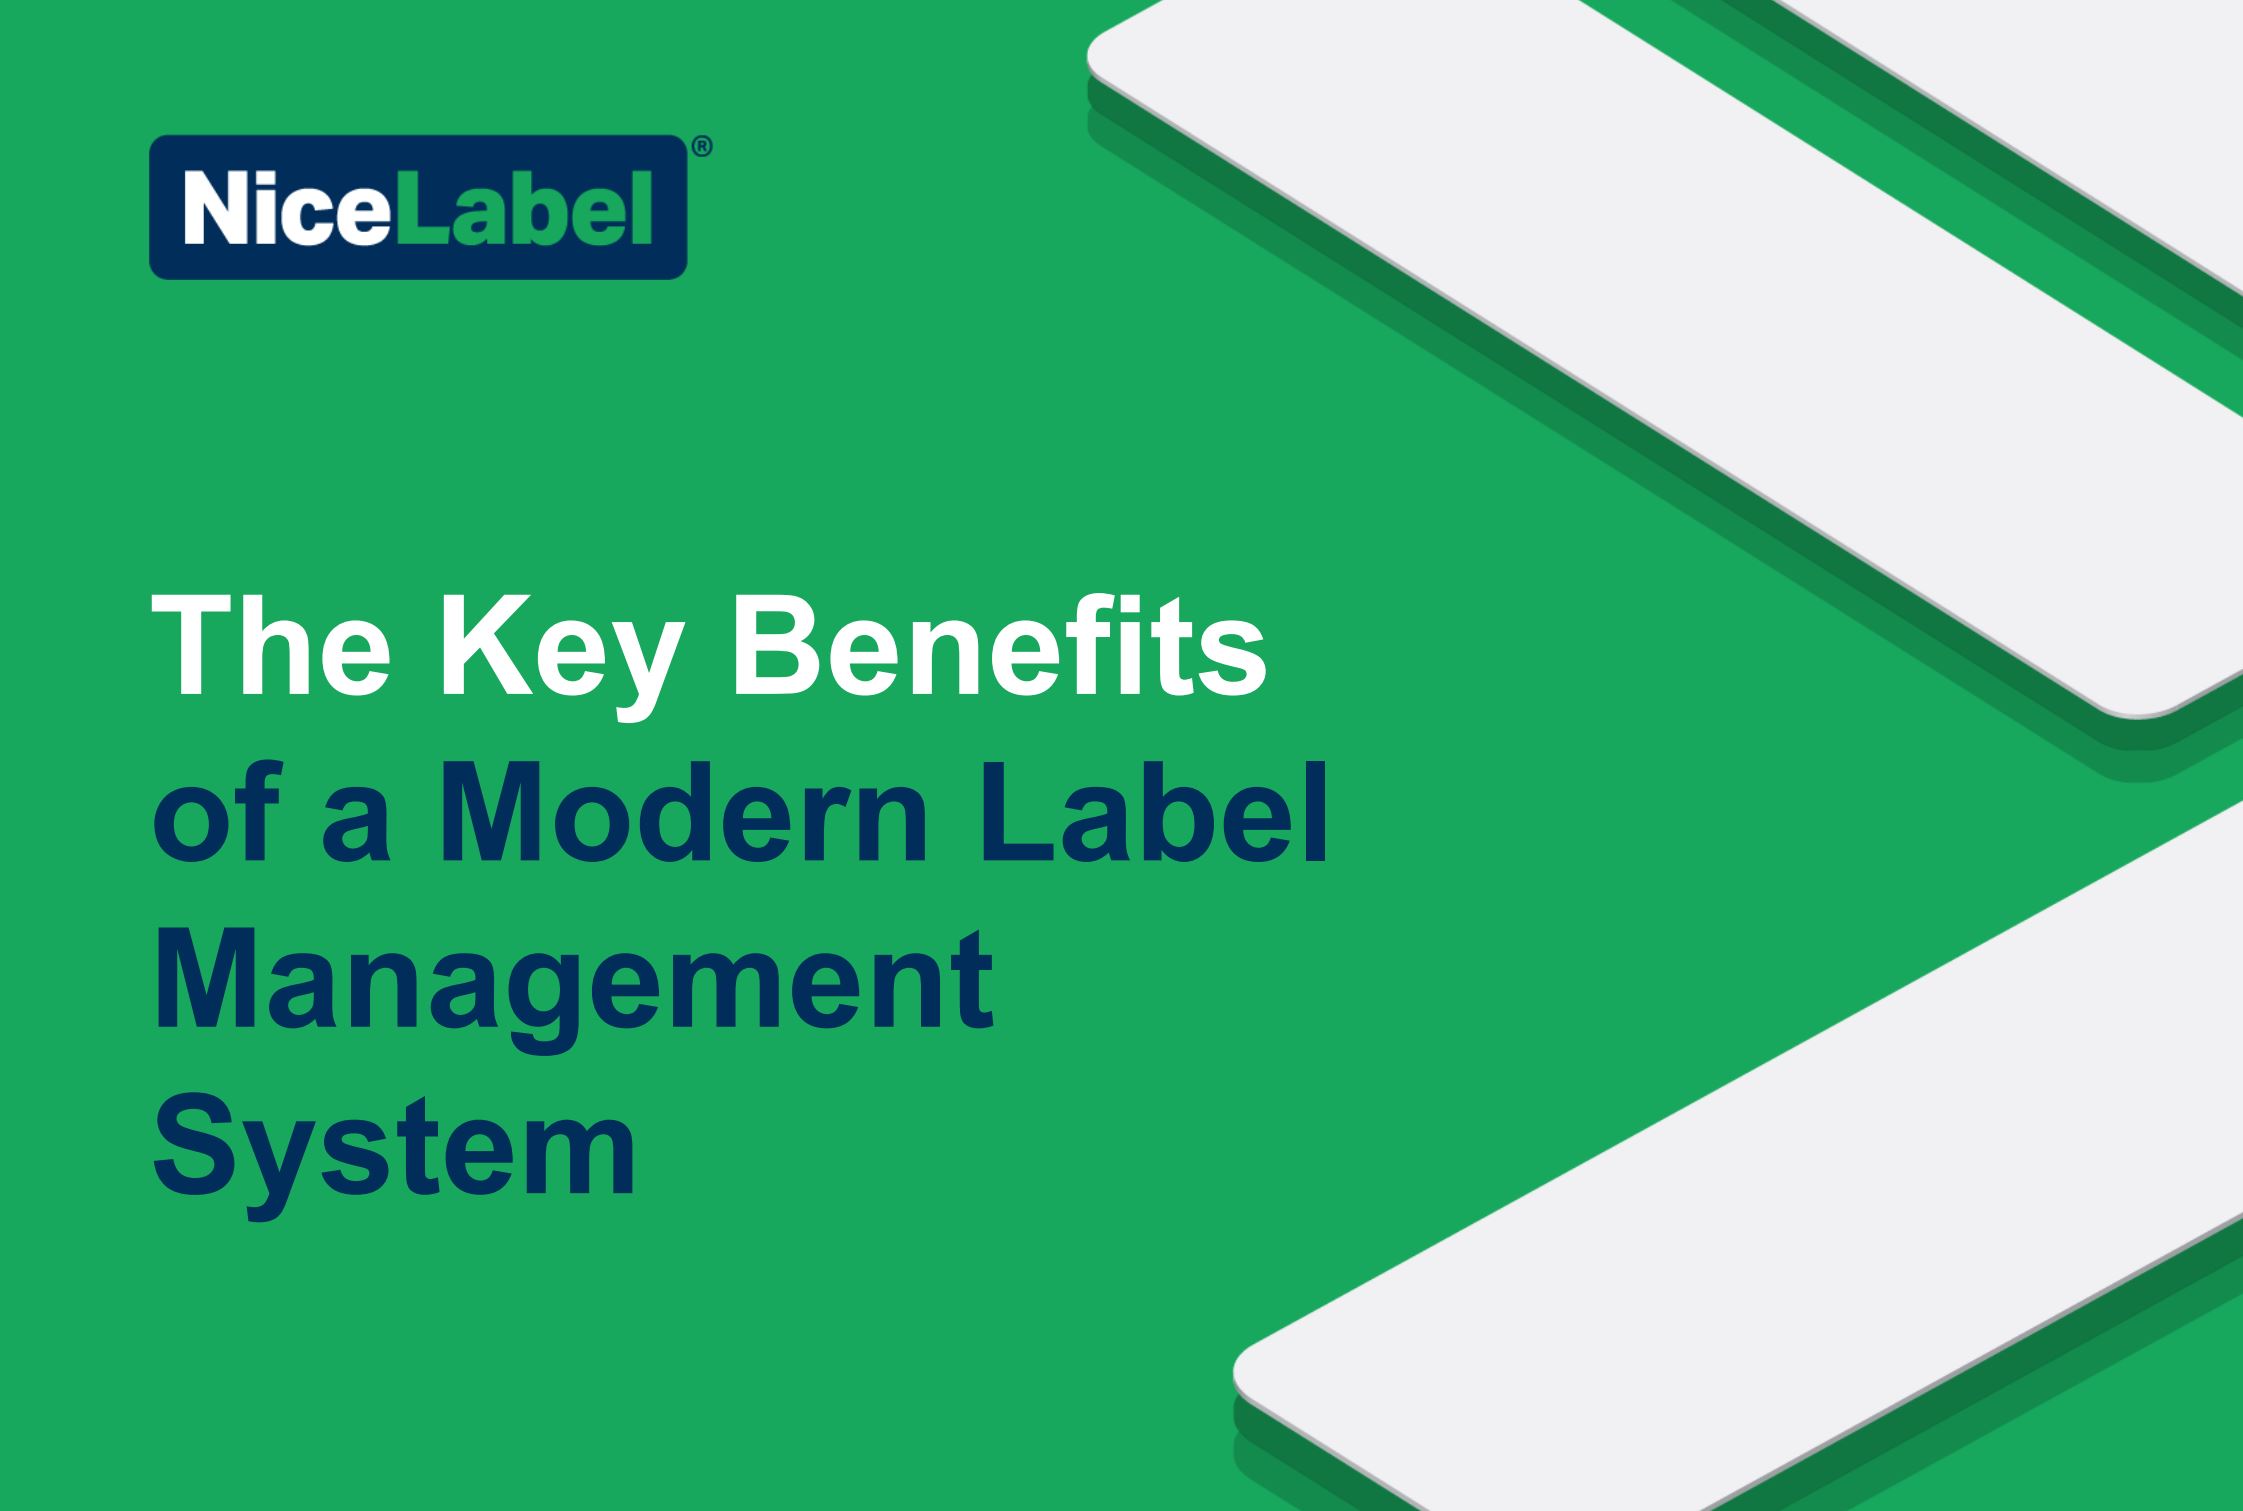 Key benefits of a modern label management system for an efficient labeling process